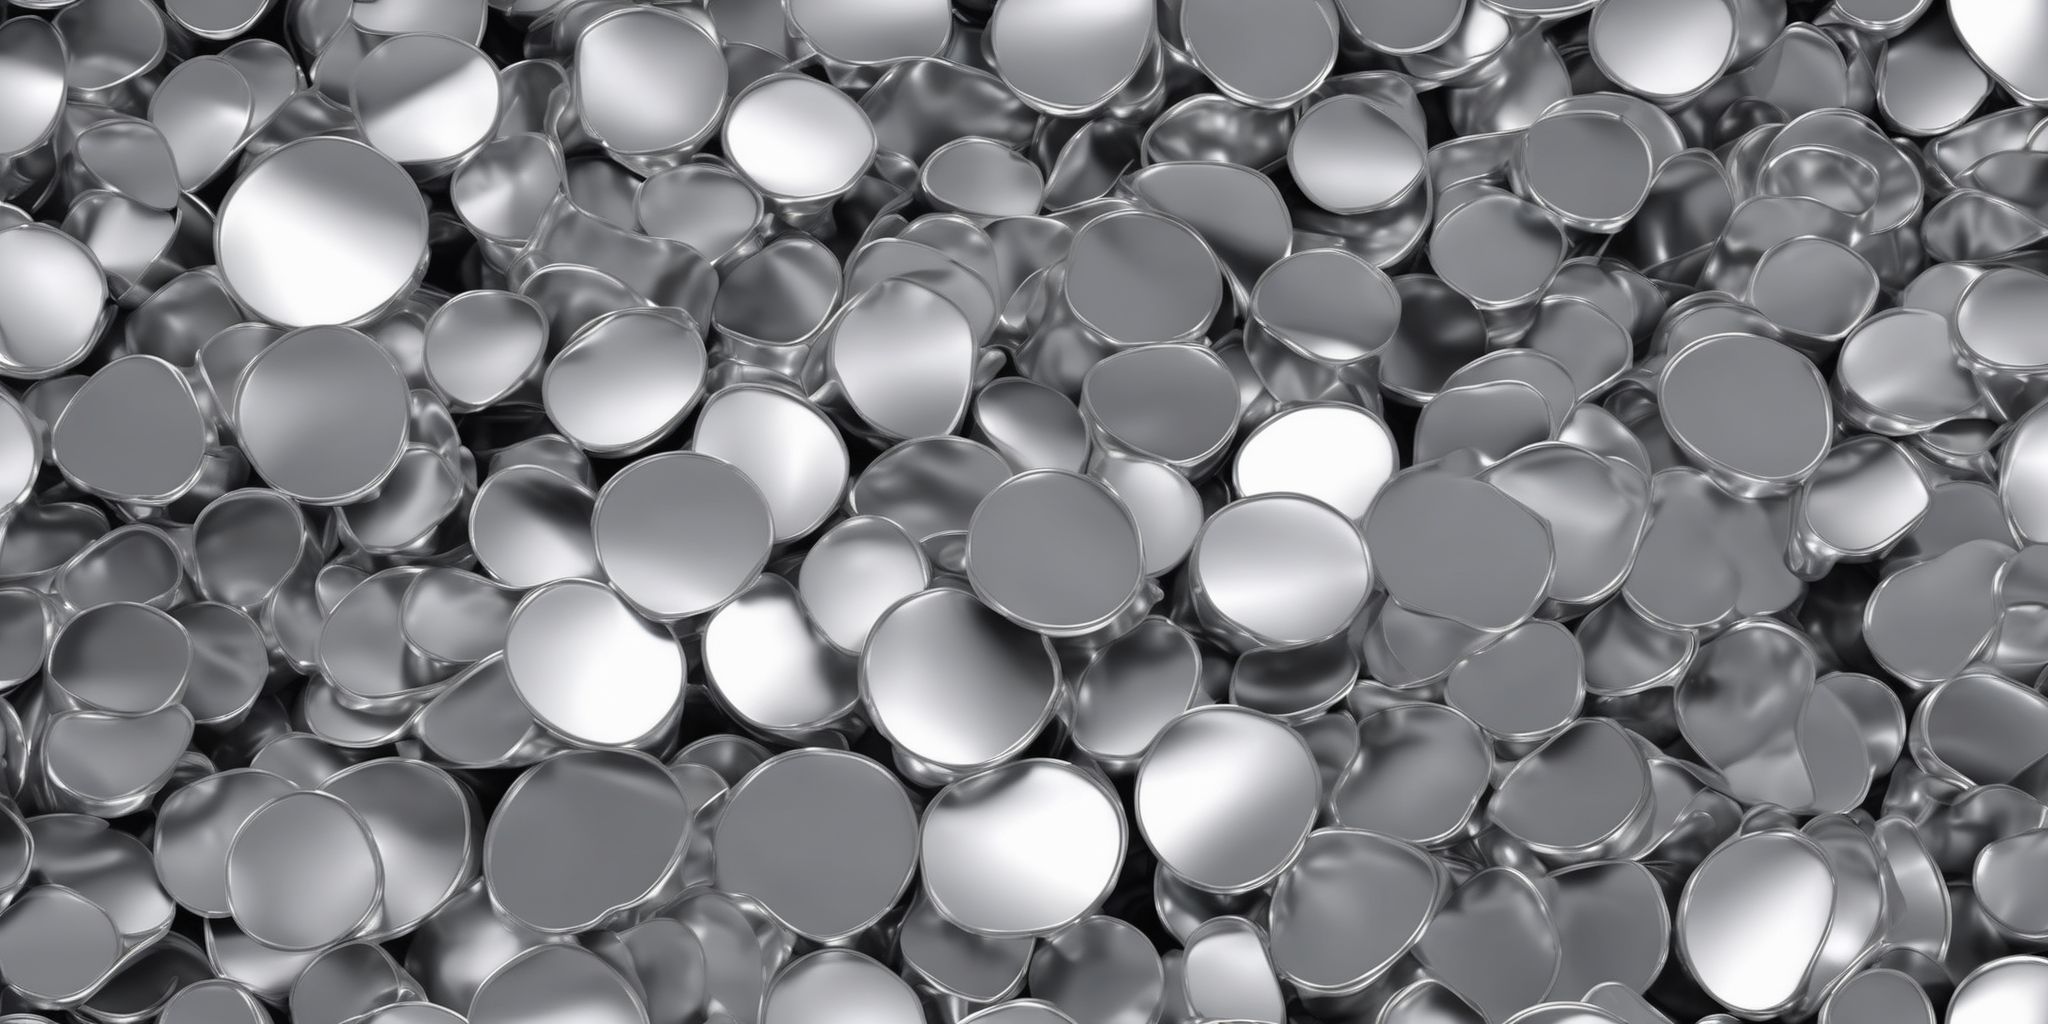 Aluminum  in realistic, photographic style